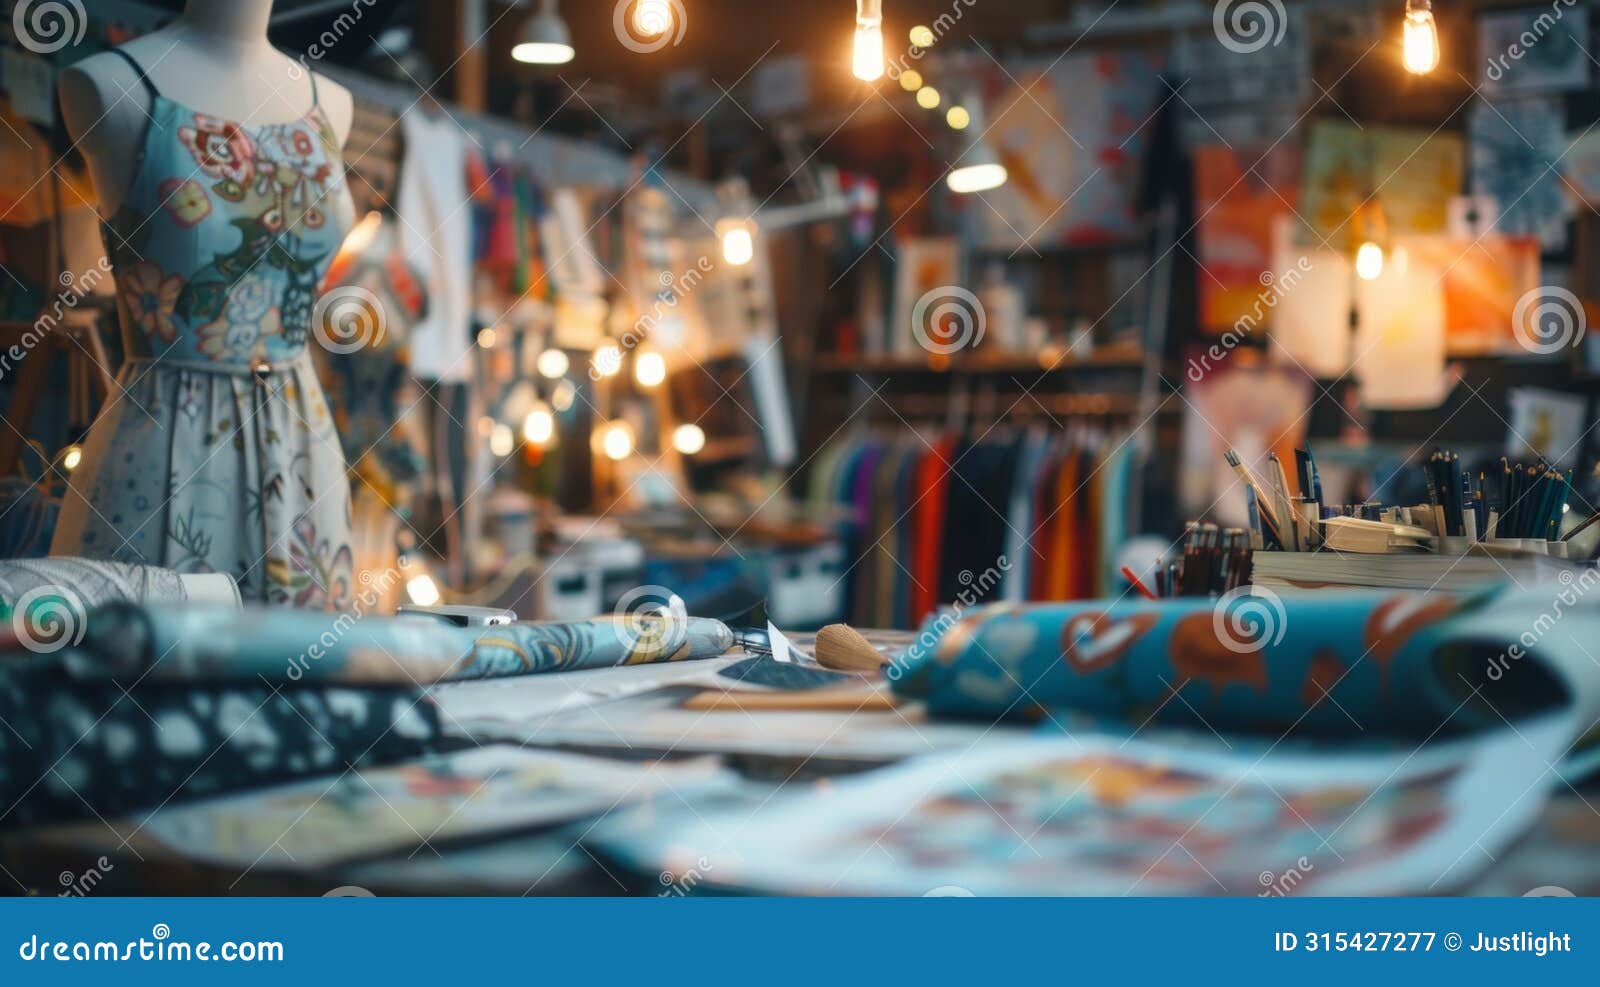 defocused lights glimmer behind a cluttered workshop revealing a canvas of swirling sketches and colorful fabric